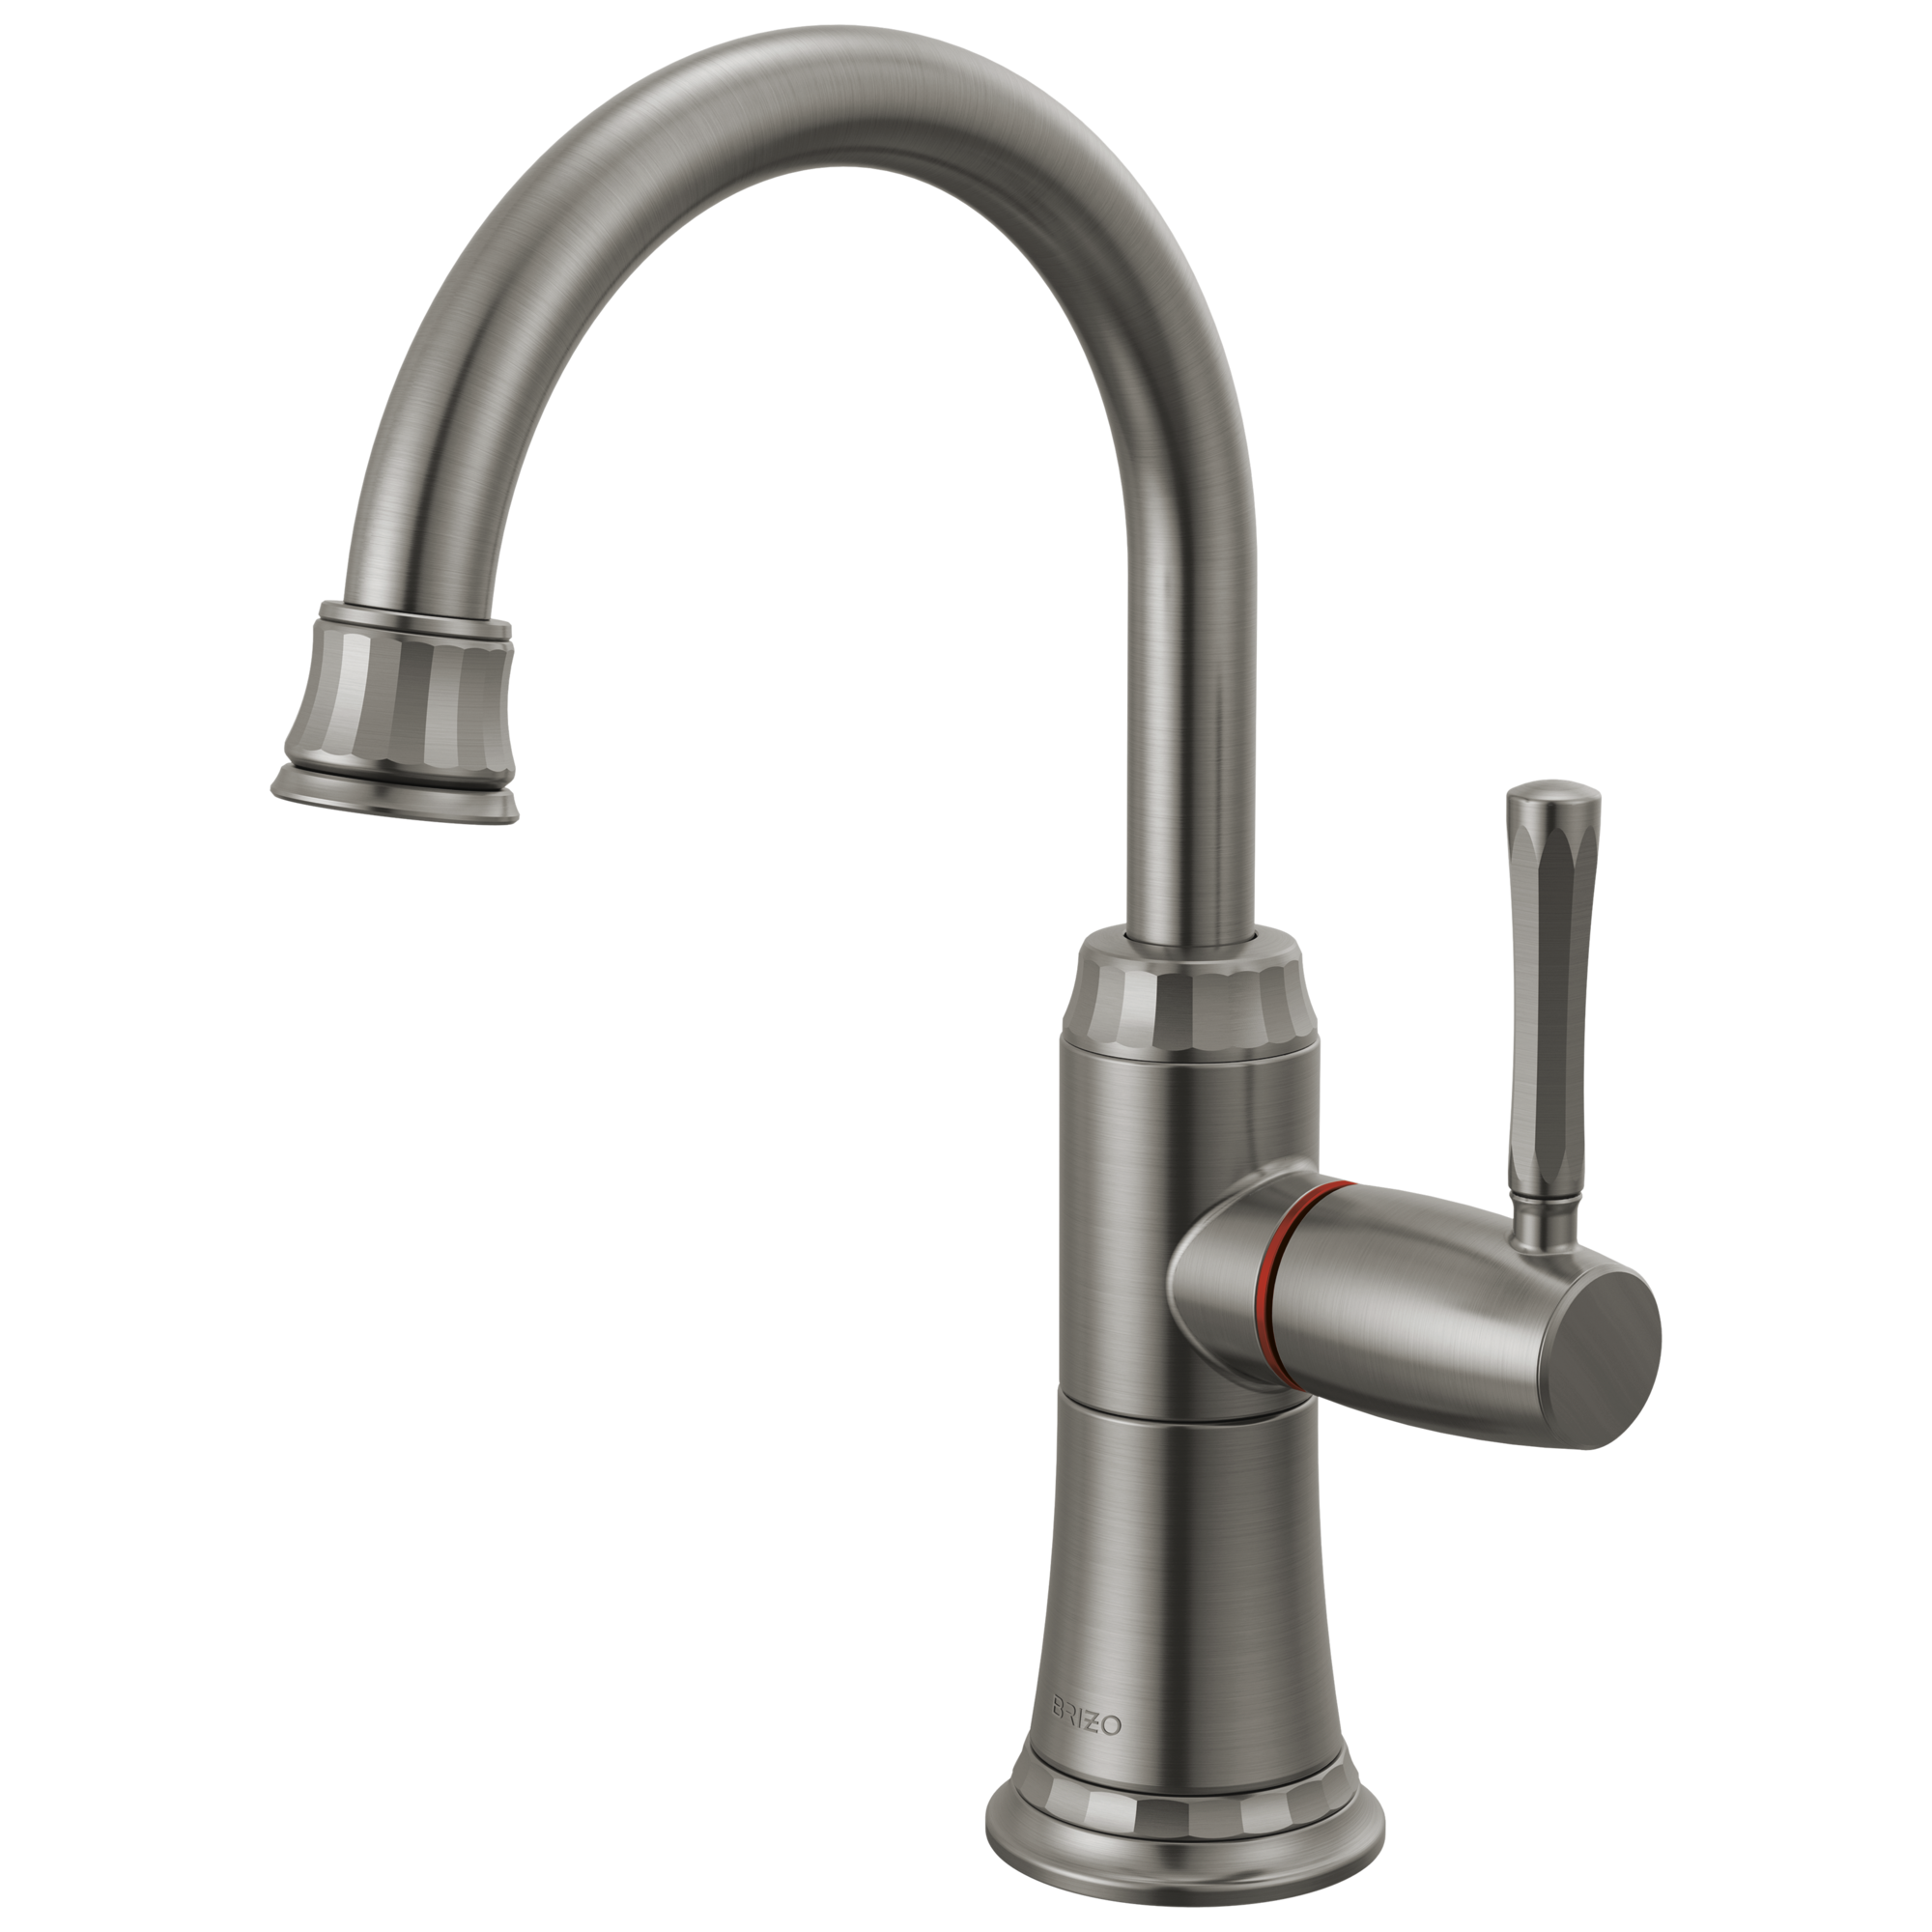 Brizo The Tulham Kitchen Collection by Brizo Instant Hot Faucet